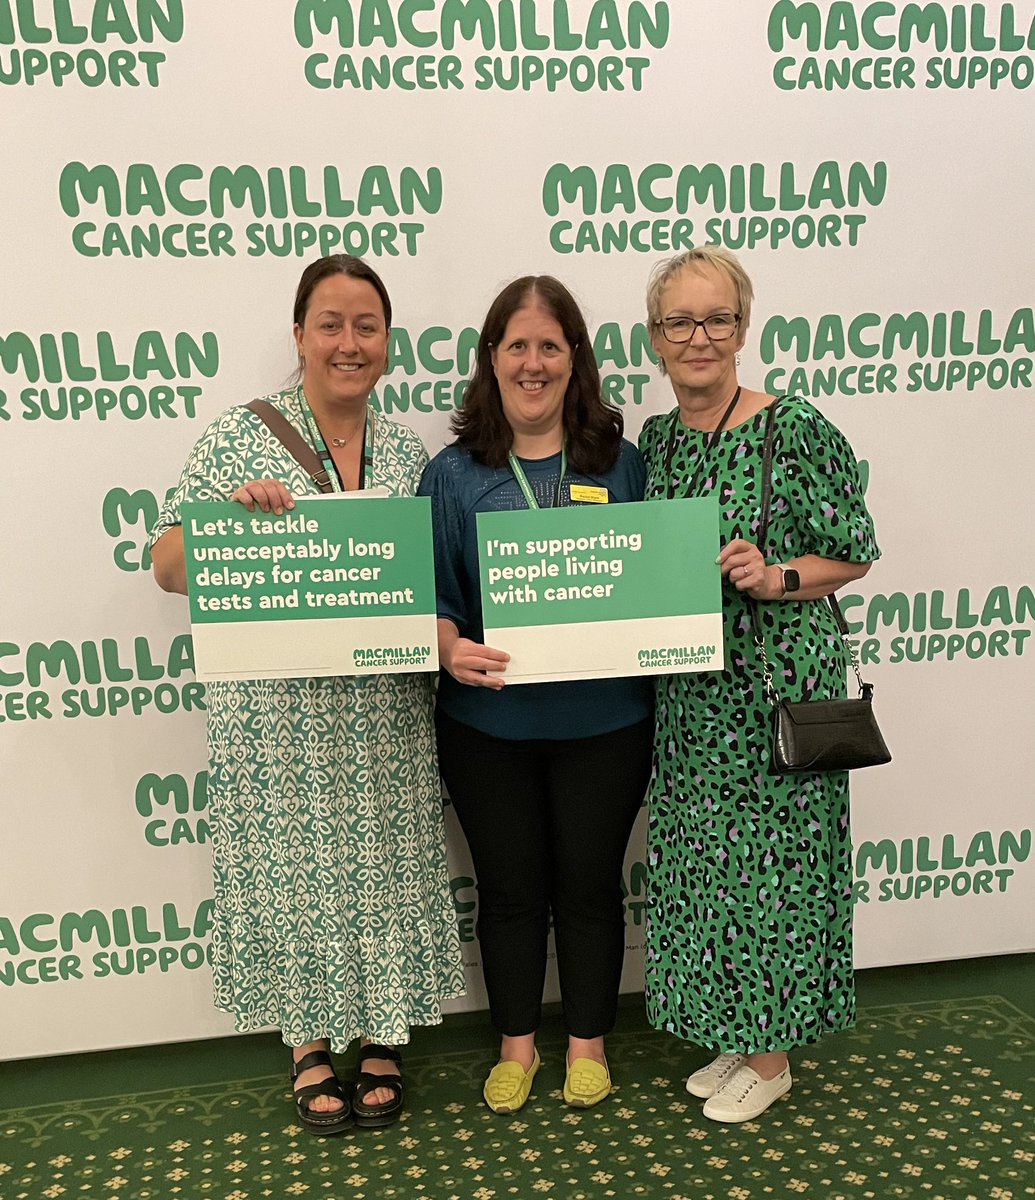 Feel very privileged and proud to have represented Macmillan and the NHS at the Macmillan Westminster Coffee morning today. So pleased to see so many MPs attend, and be able to discuss the real issues we are currently facing in cancer care @macmillancancer @UHP_NHS